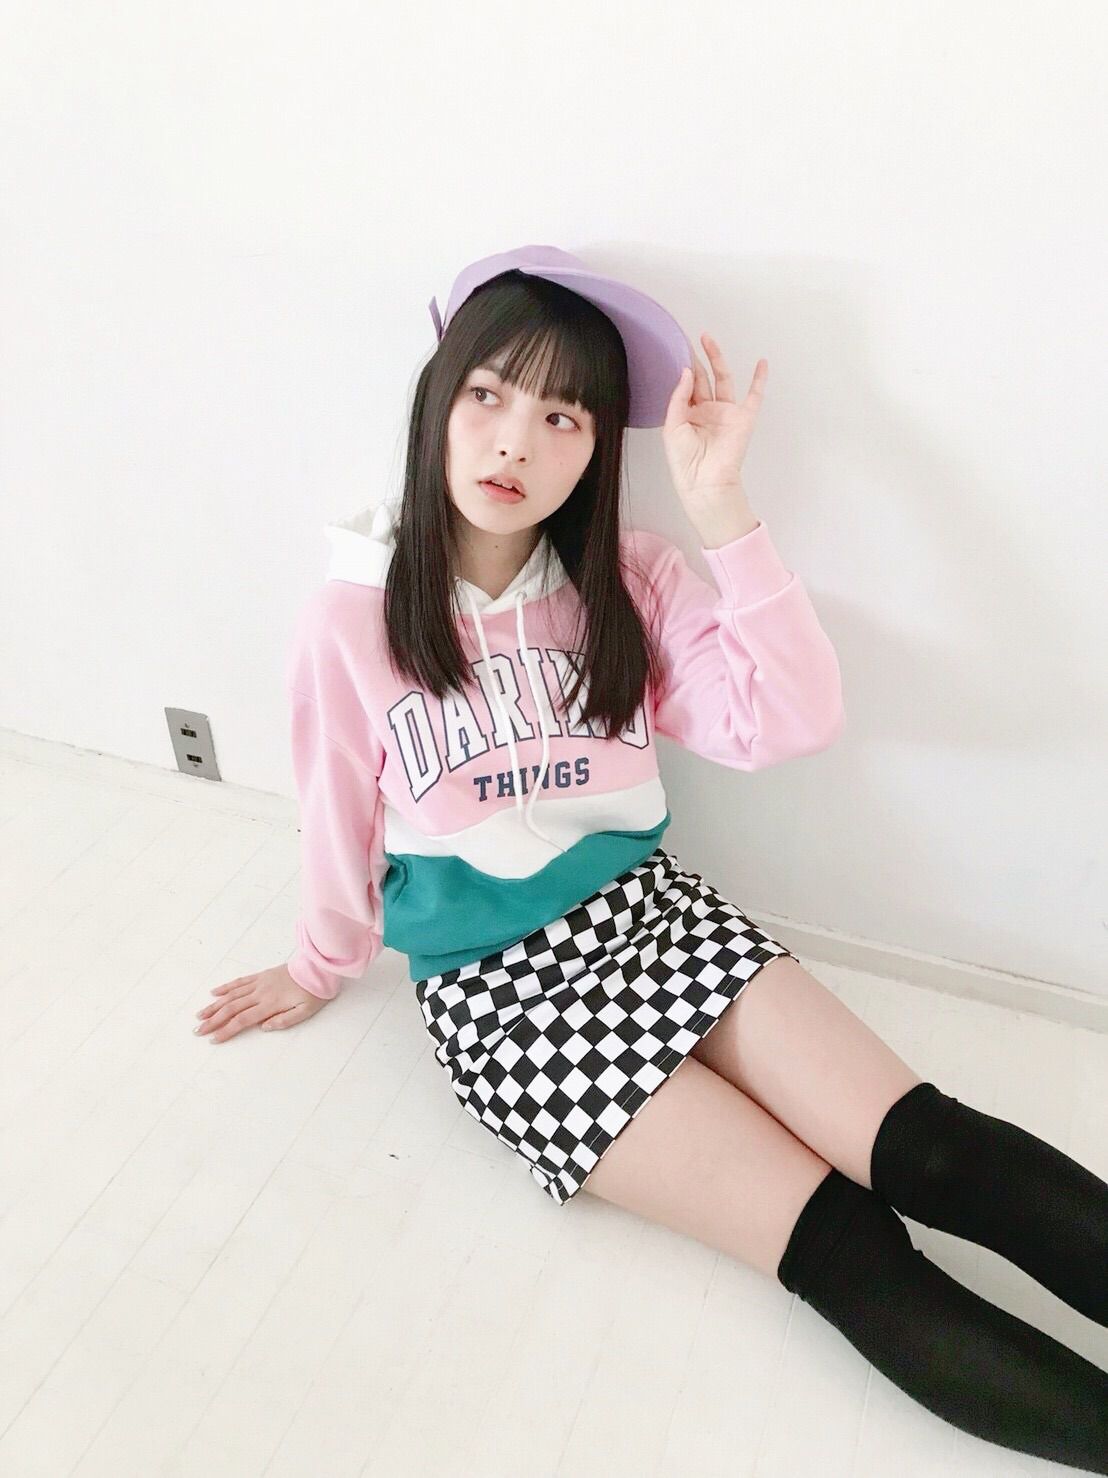 Sumire Uesaka "to emphasize the thigh... W] also erotic image offer Wwwwwww 4